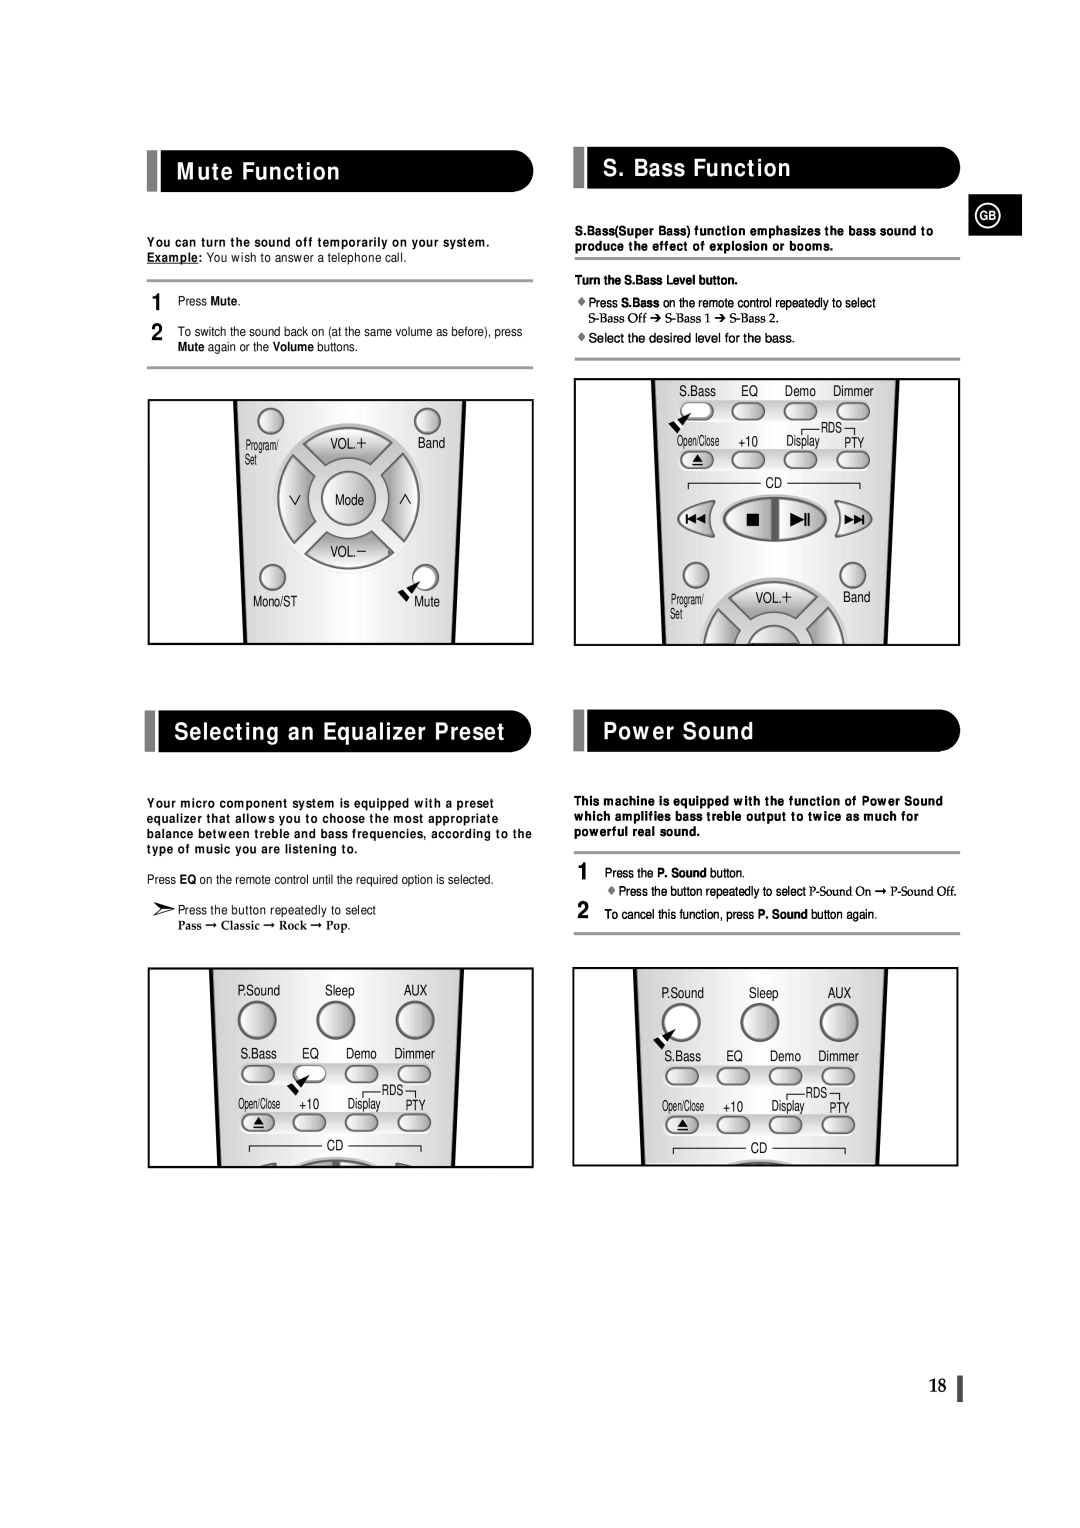 Samsung EV-1S instruction manual Mute Function, S. Bass Function, Selecting an Equalizer Preset, Power Sound 